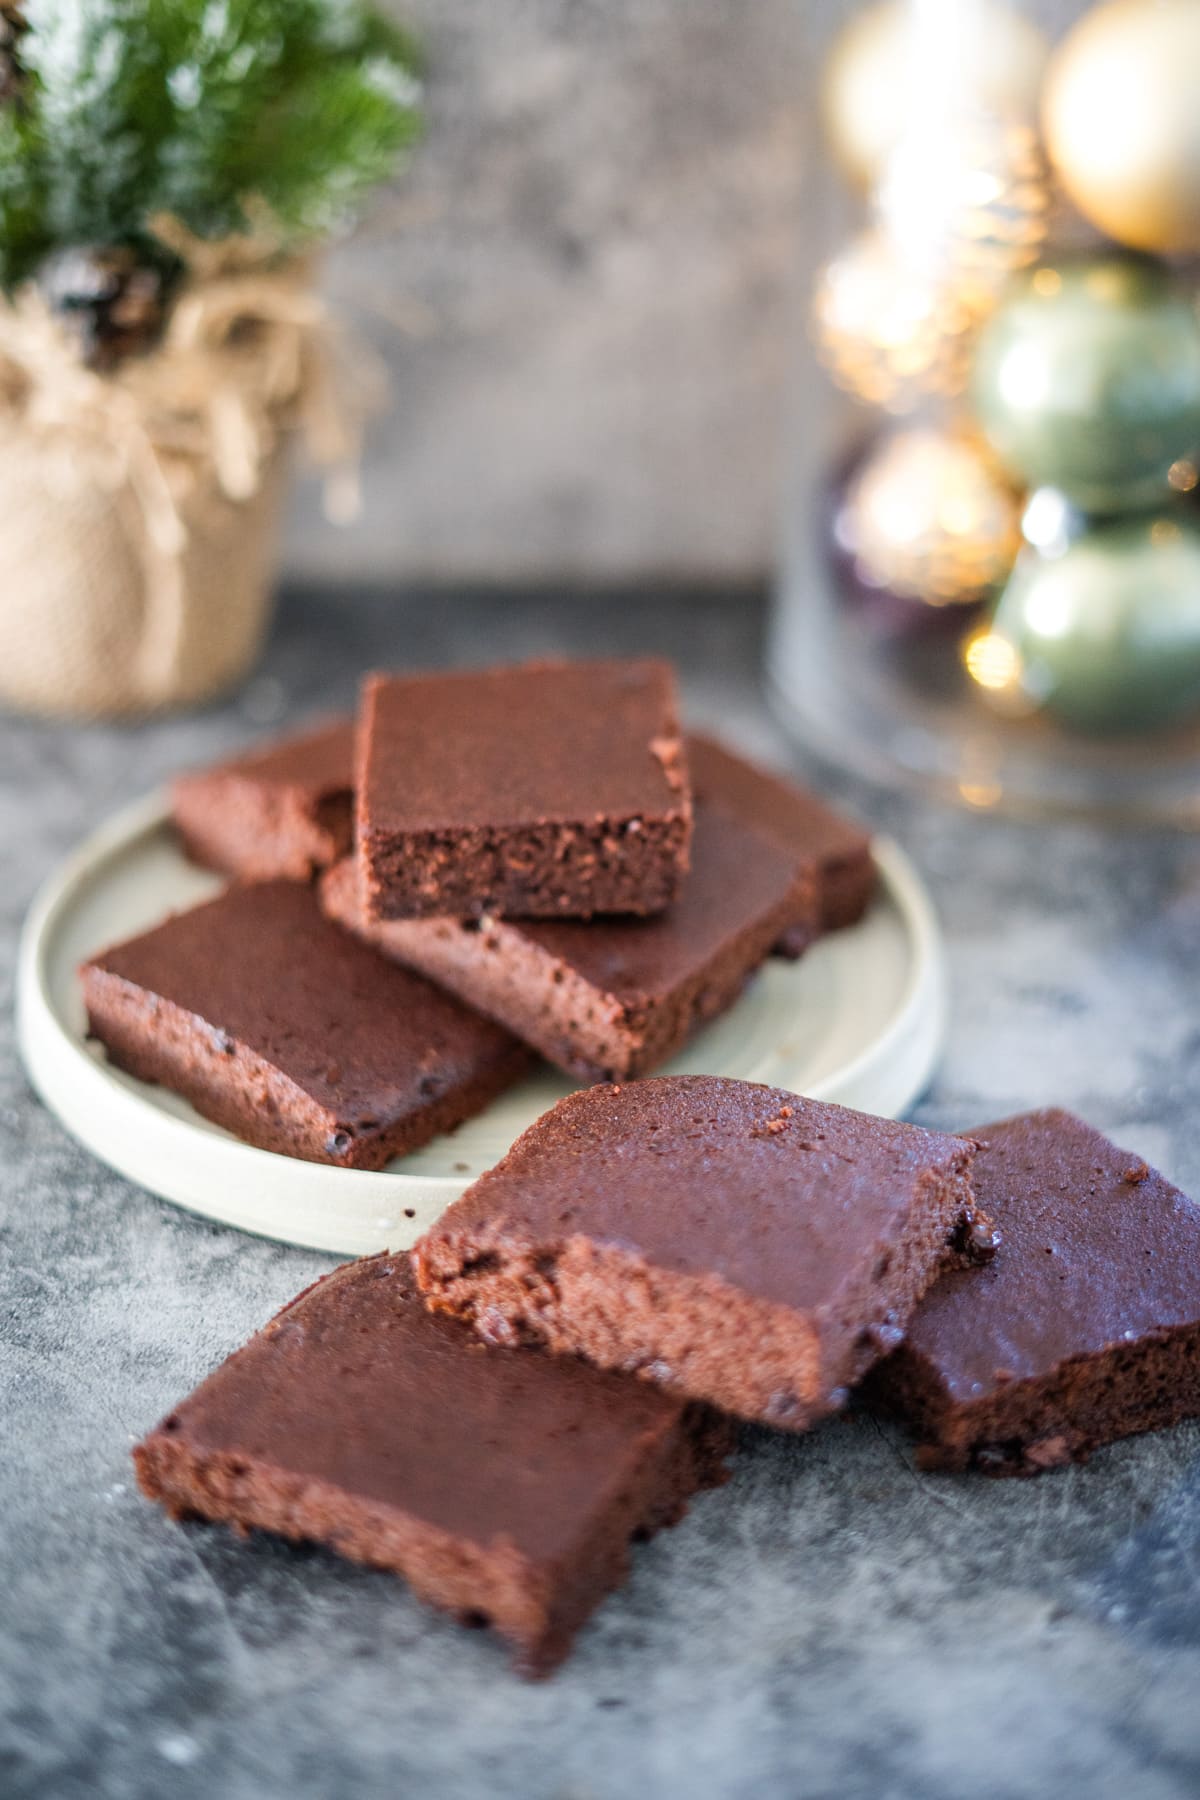         Description: Spiced brownies on a plate with christmas decorations.